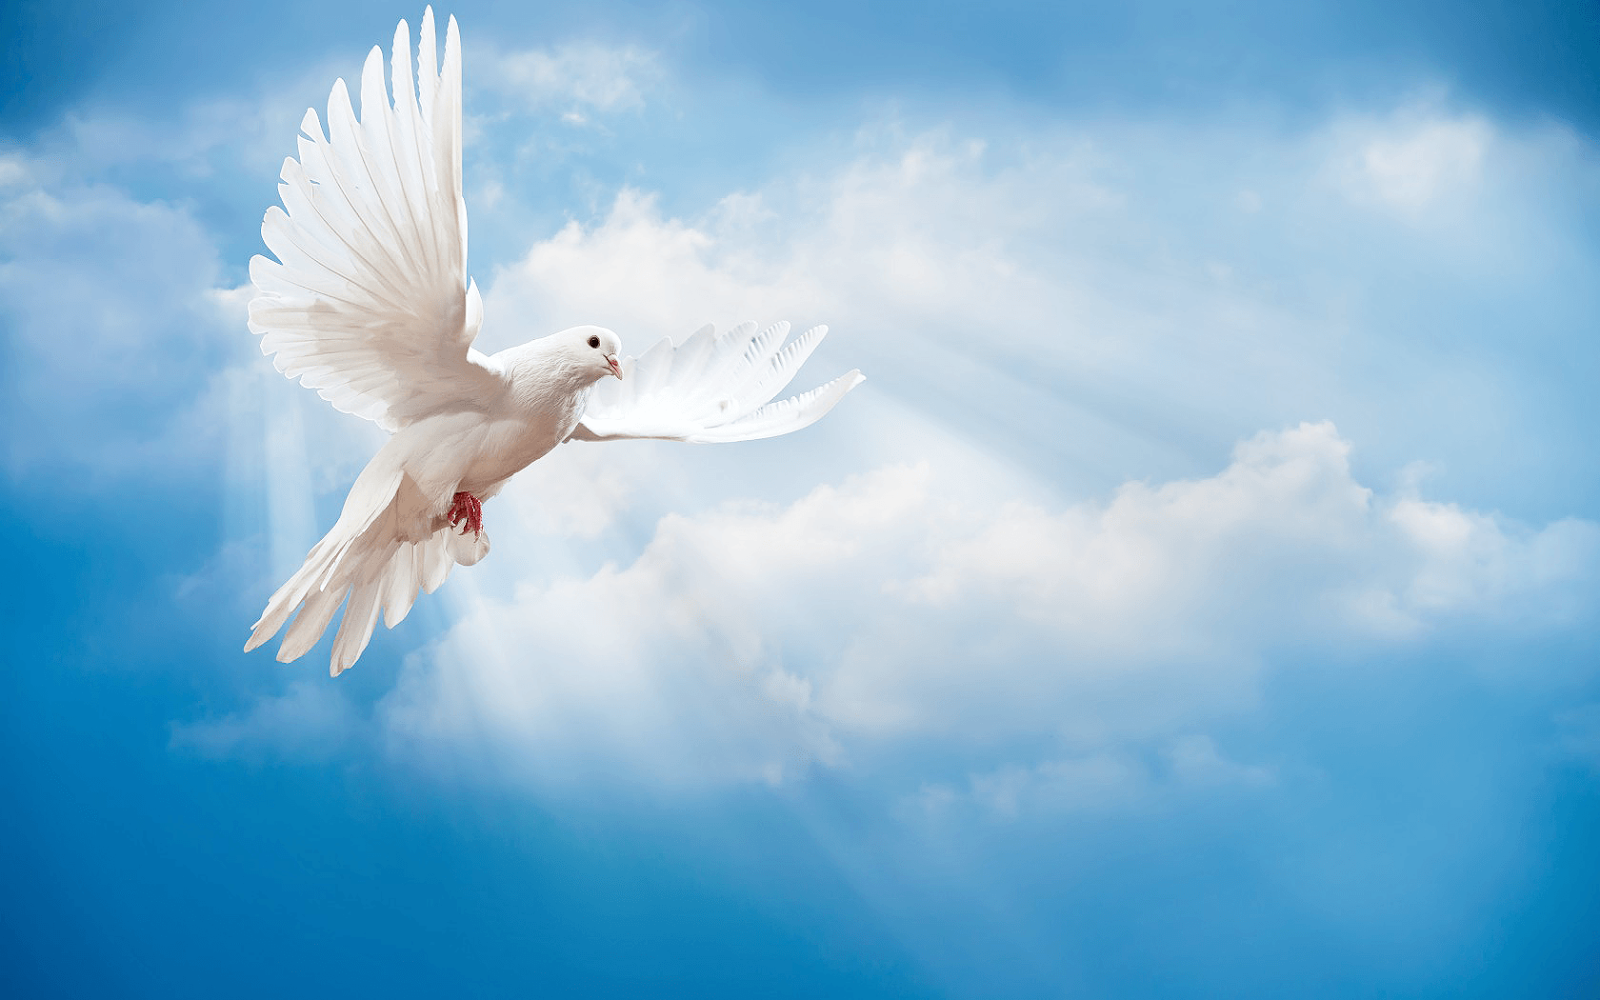  dove stands for peace Please share this bird wallpaper if you like 1600x1000